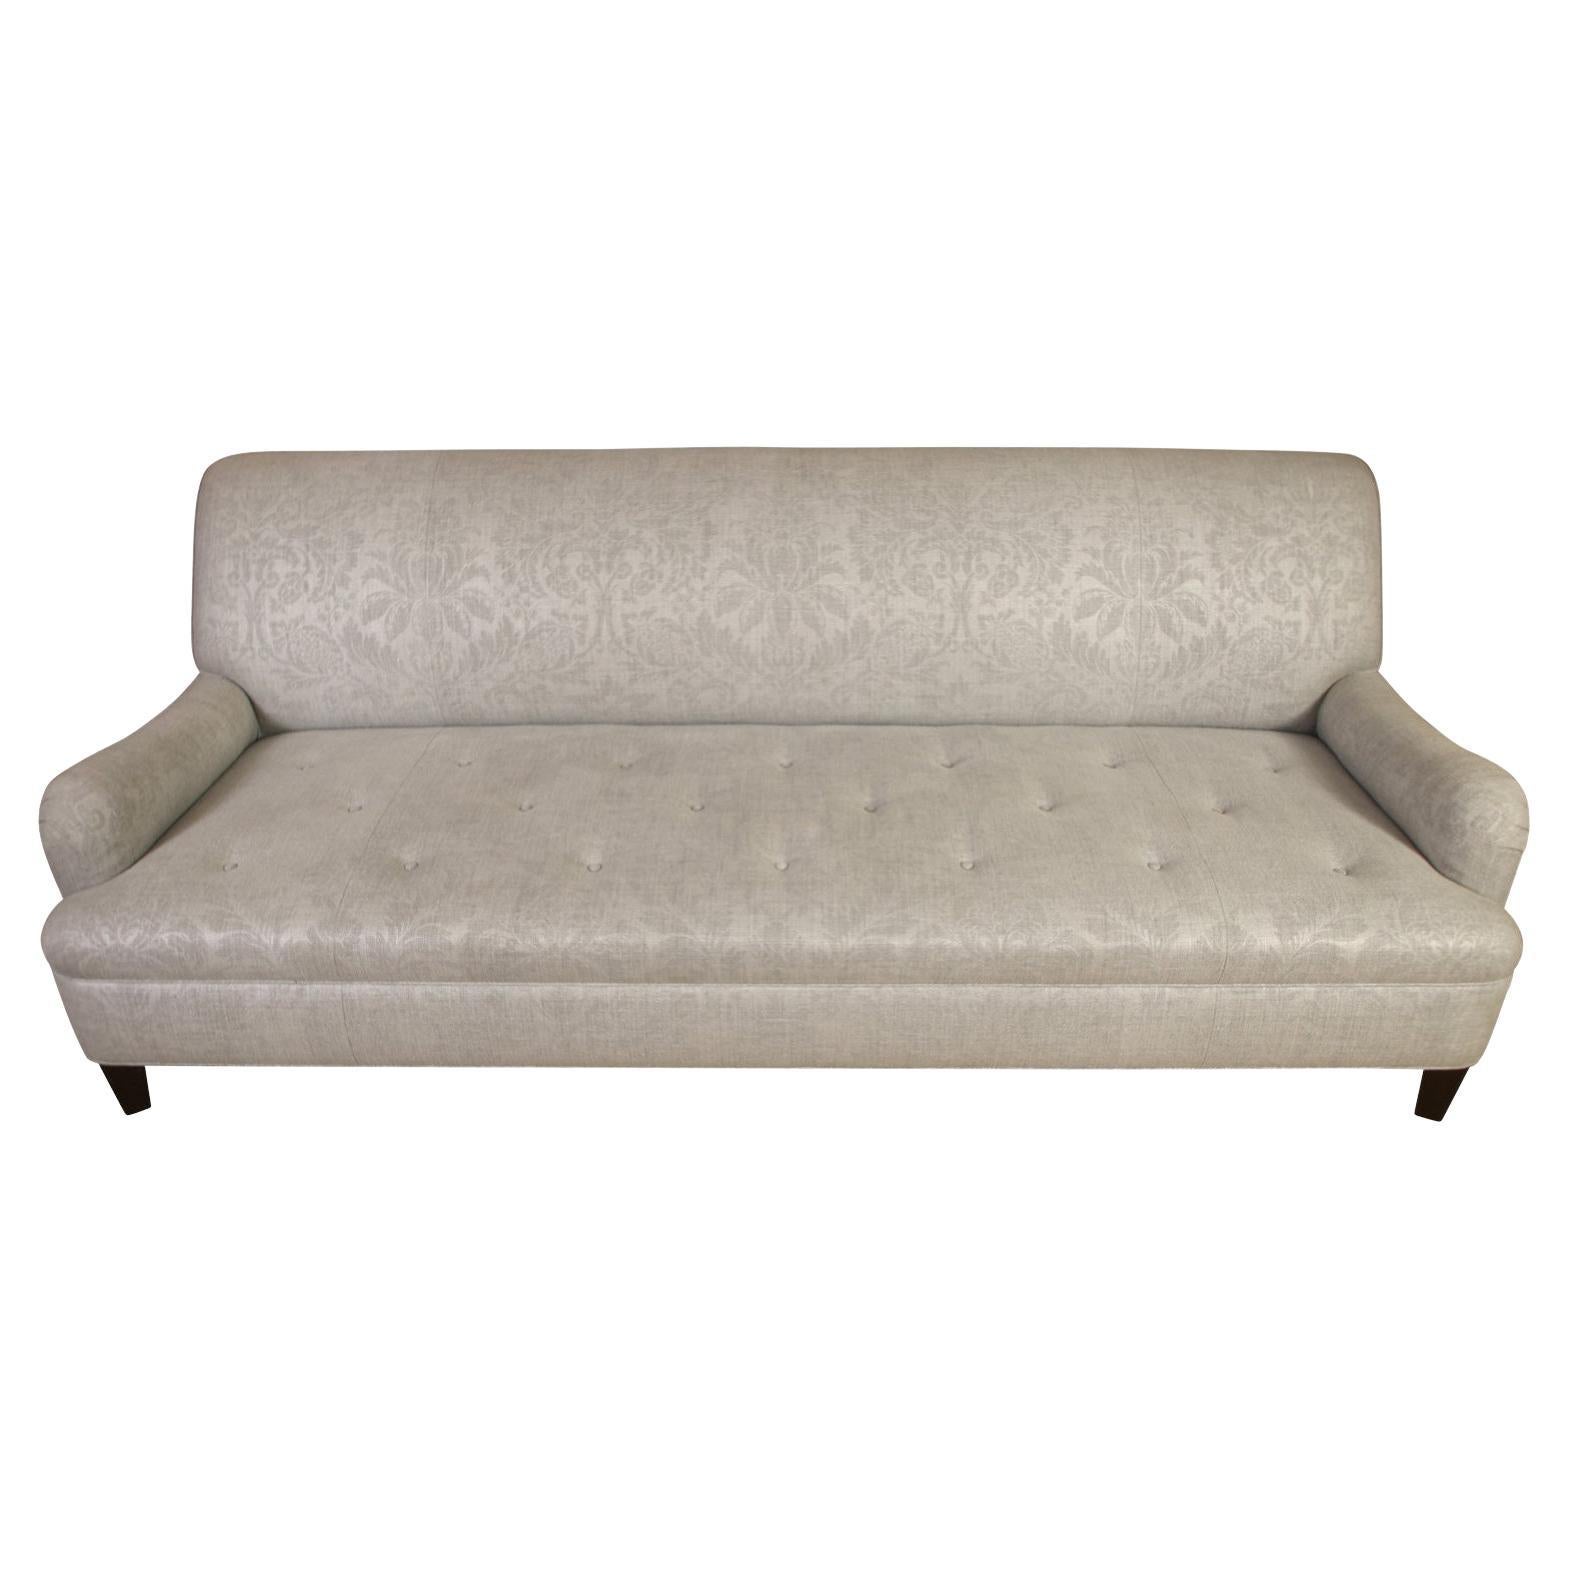 Silver Jacquard Sofa With Tufted Seat For Sale